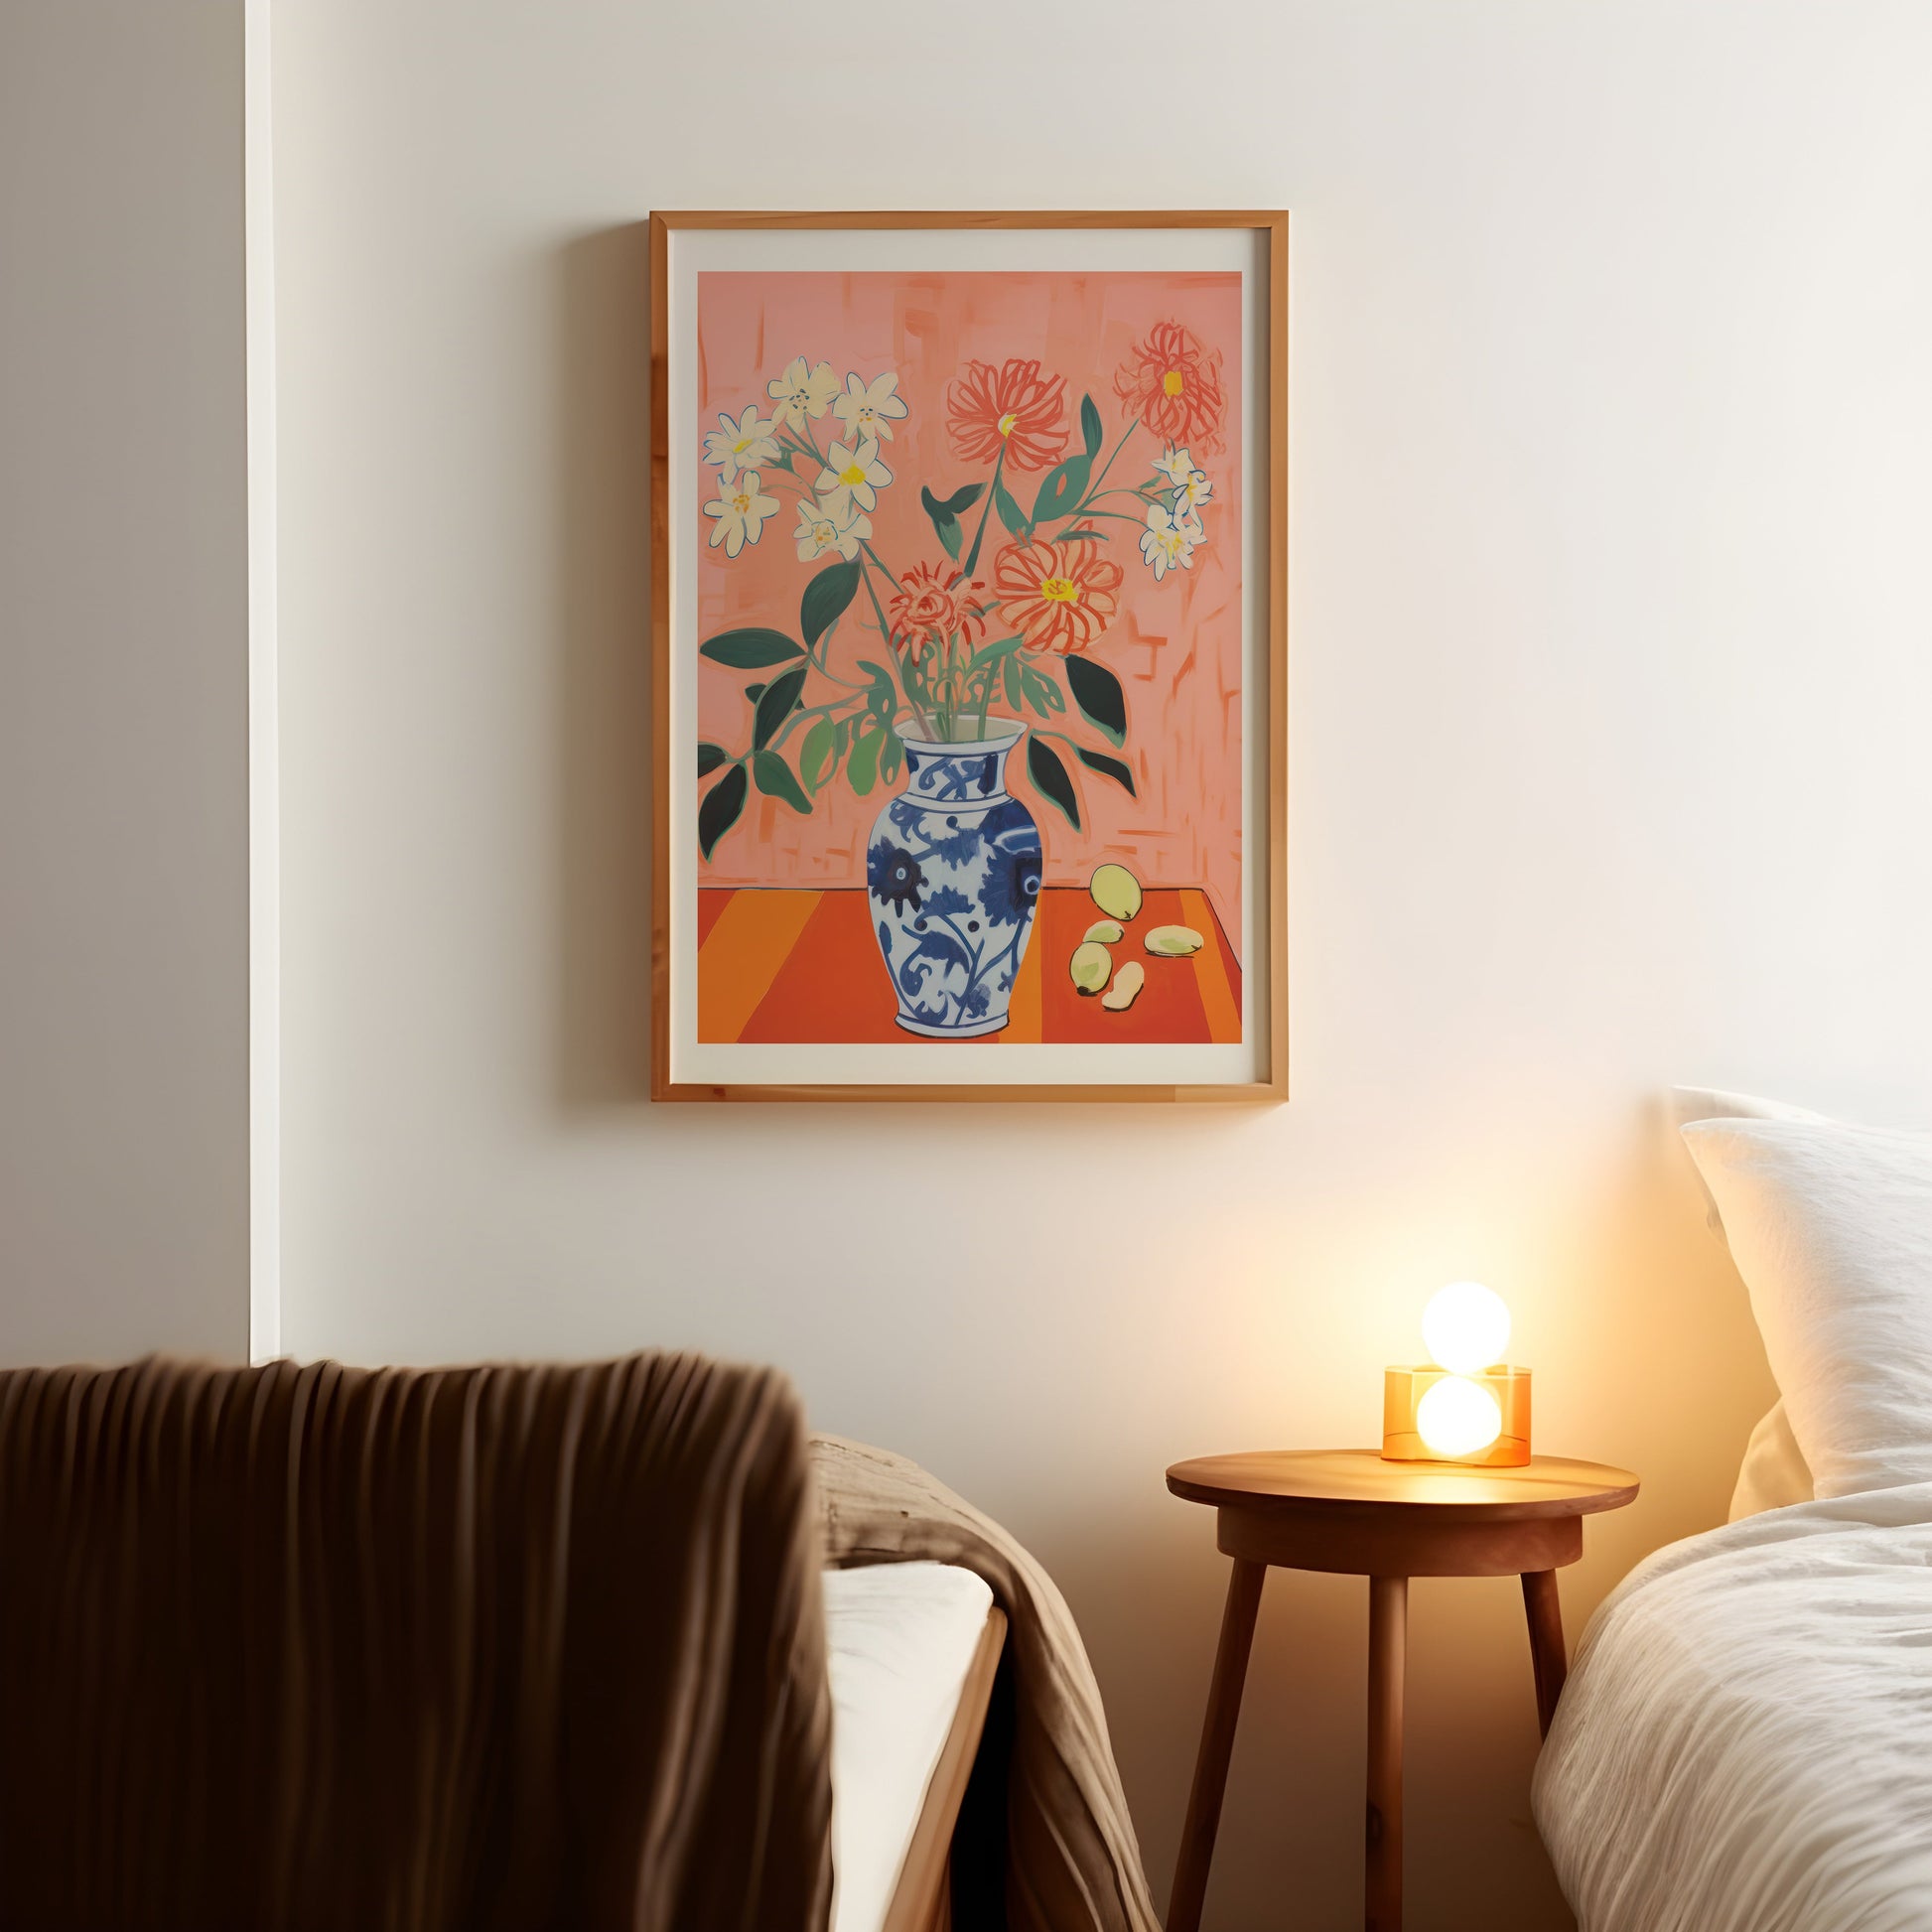 a picture of a vase of flowers on a wall above a bed